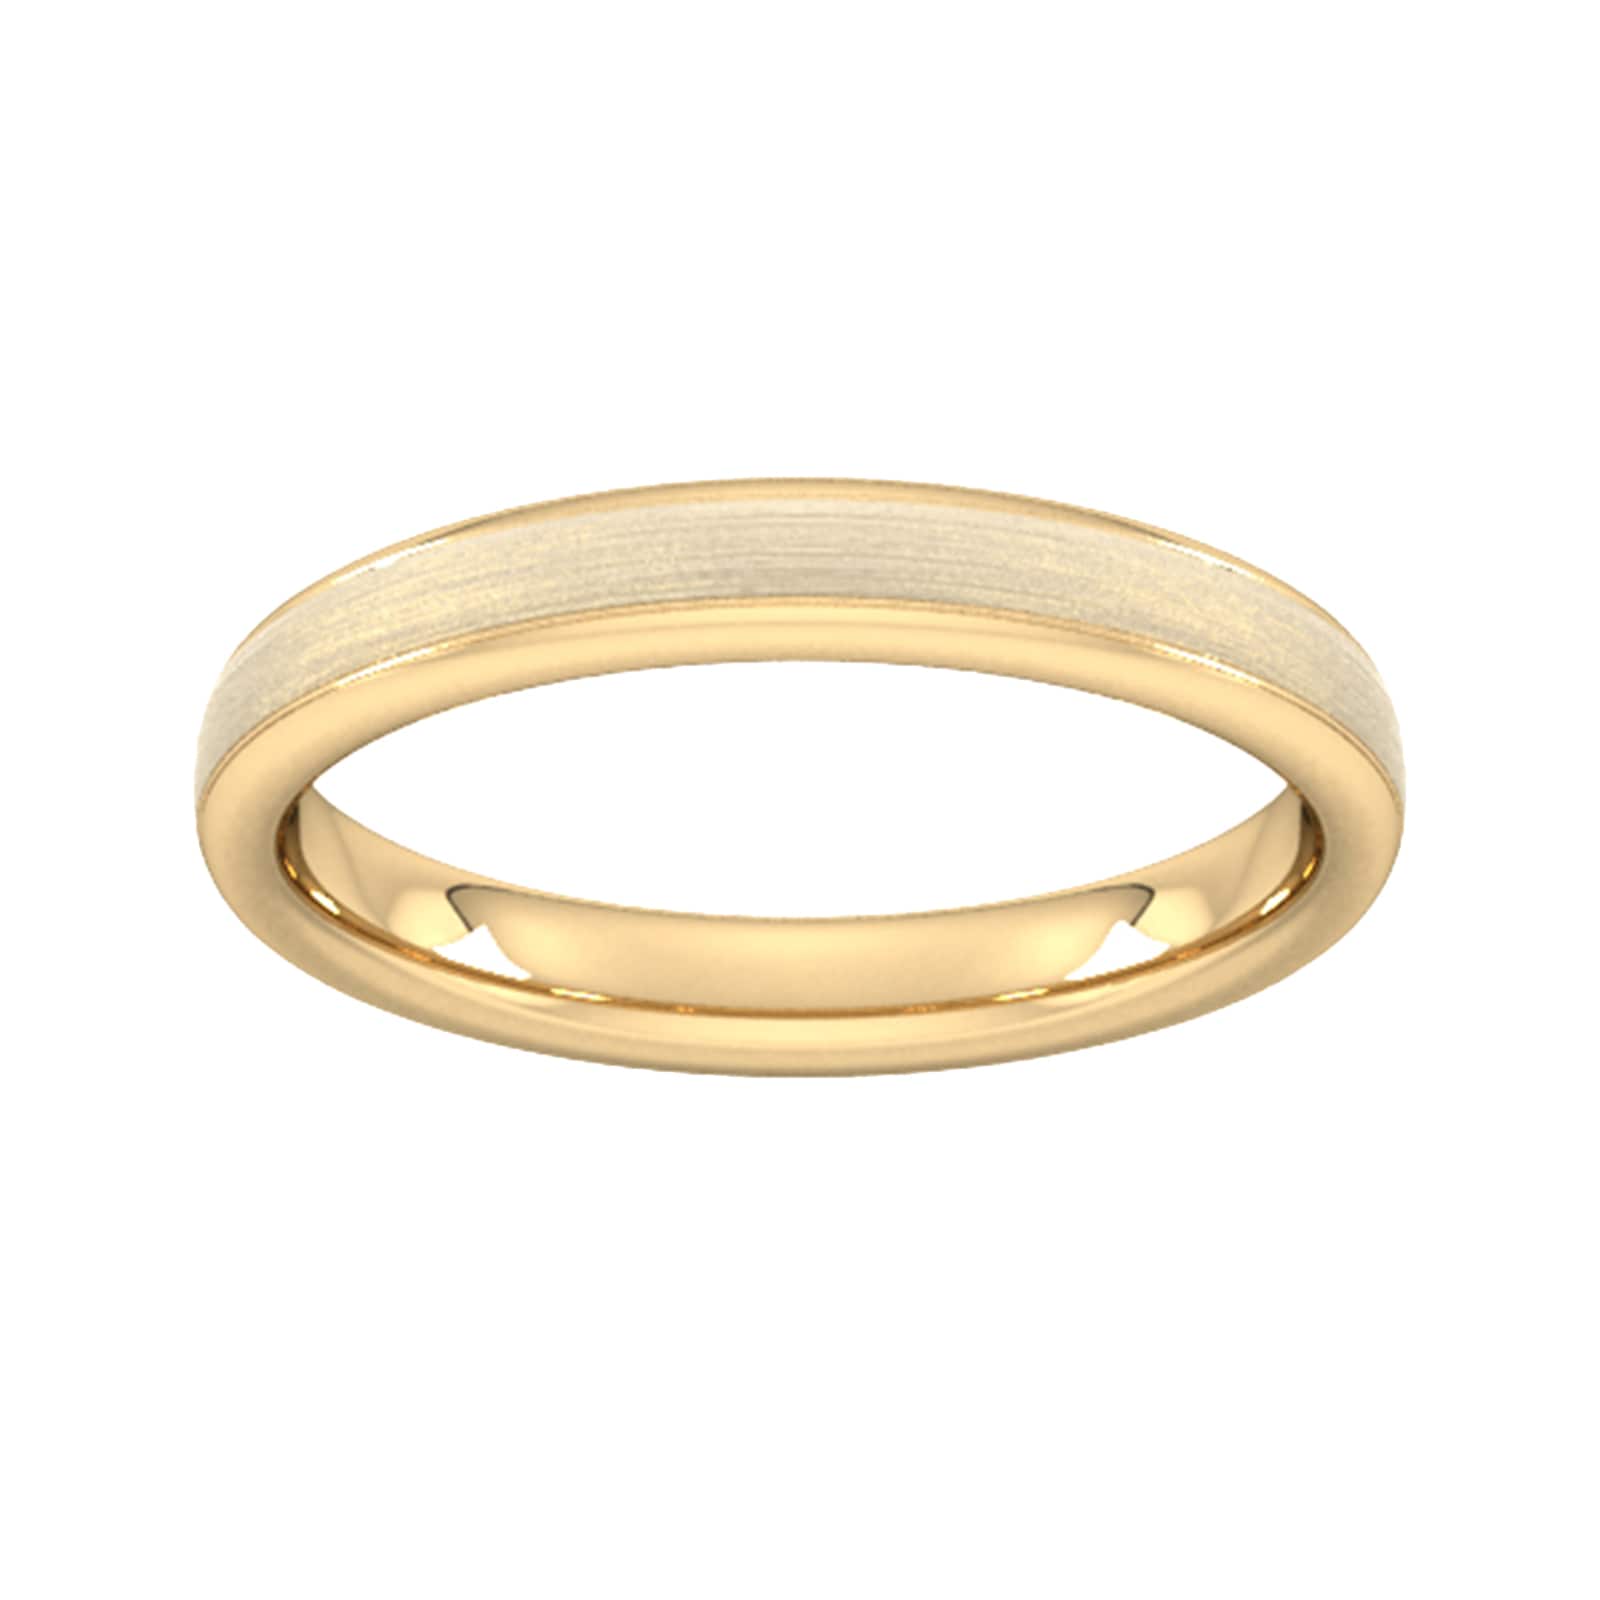 3mm Slight Court Standard Matt Centre With Grooves Wedding Ring In 18 Carat Yellow Gold - Ring Size U